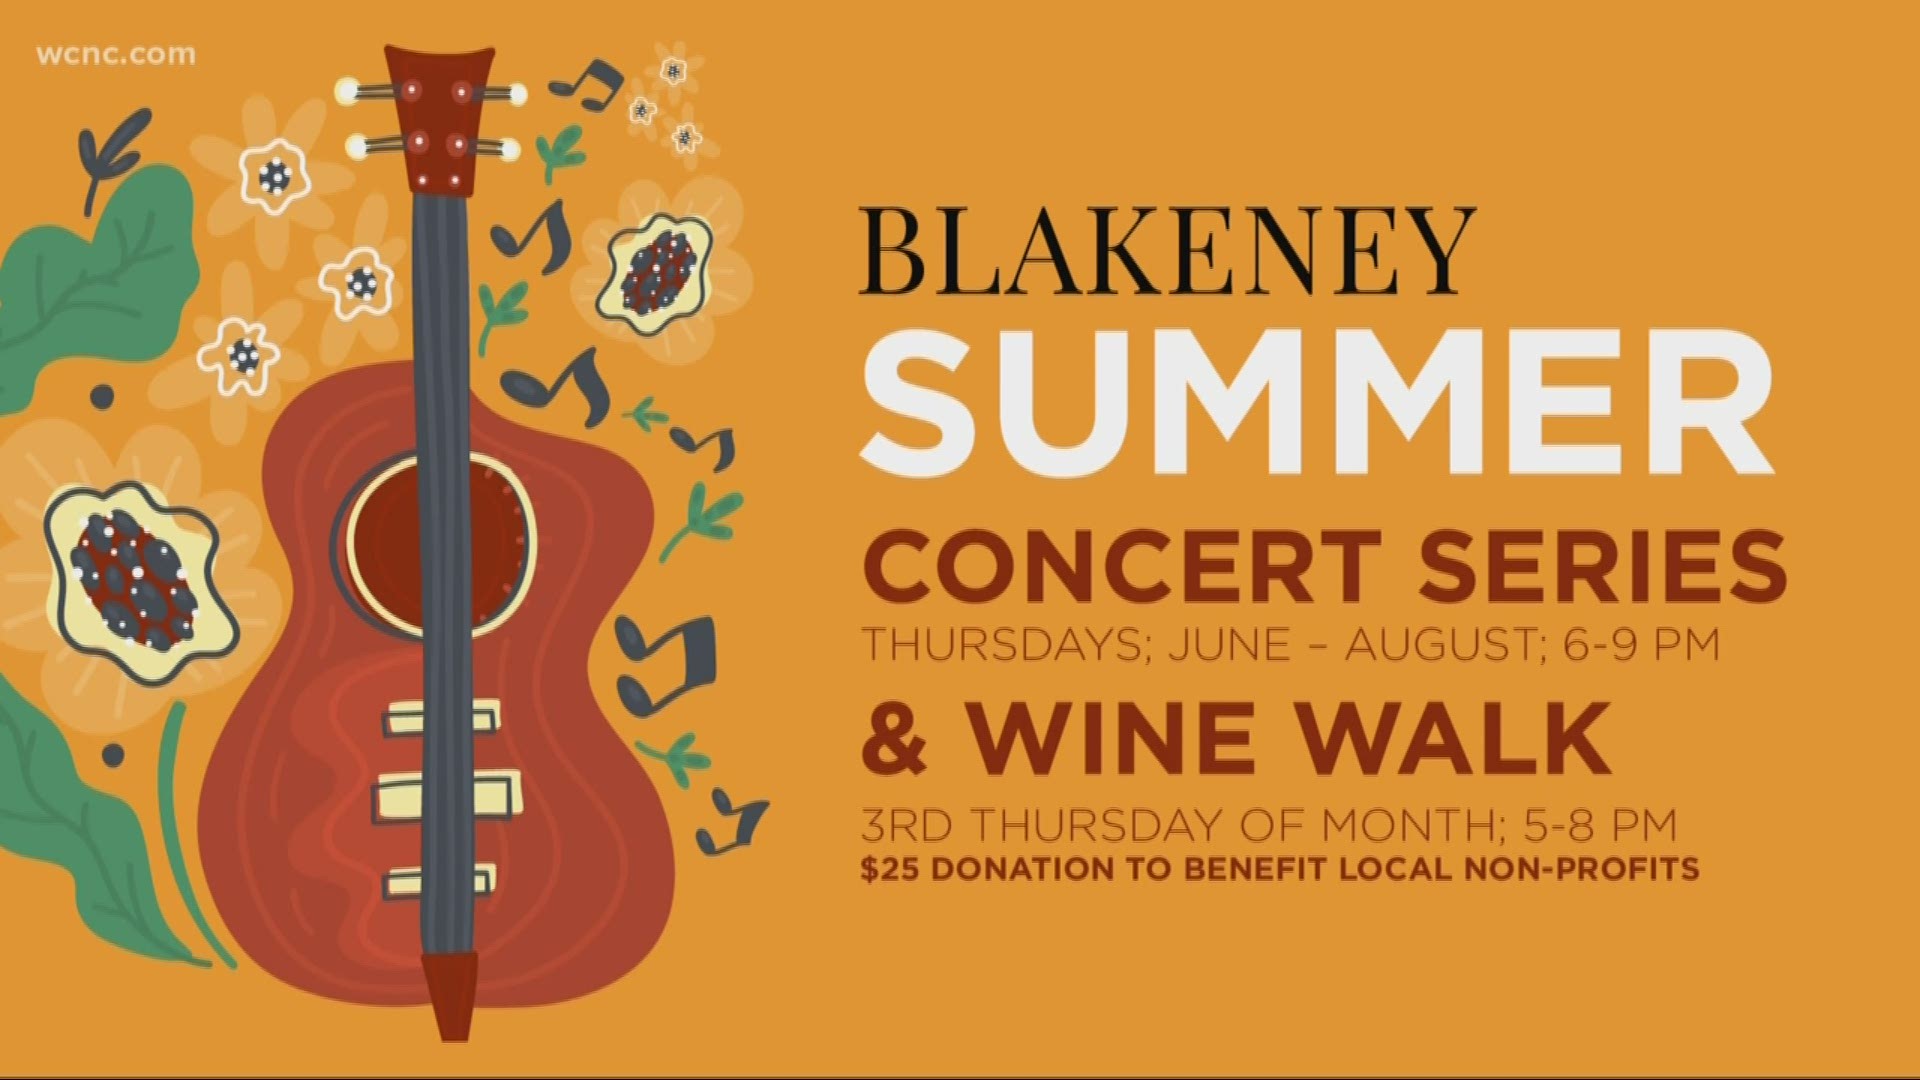 What better way to spend a summer night than outside with live music? The summer concert series at Blakeney Shopping Center begins June 6th and is every Thursday through August.